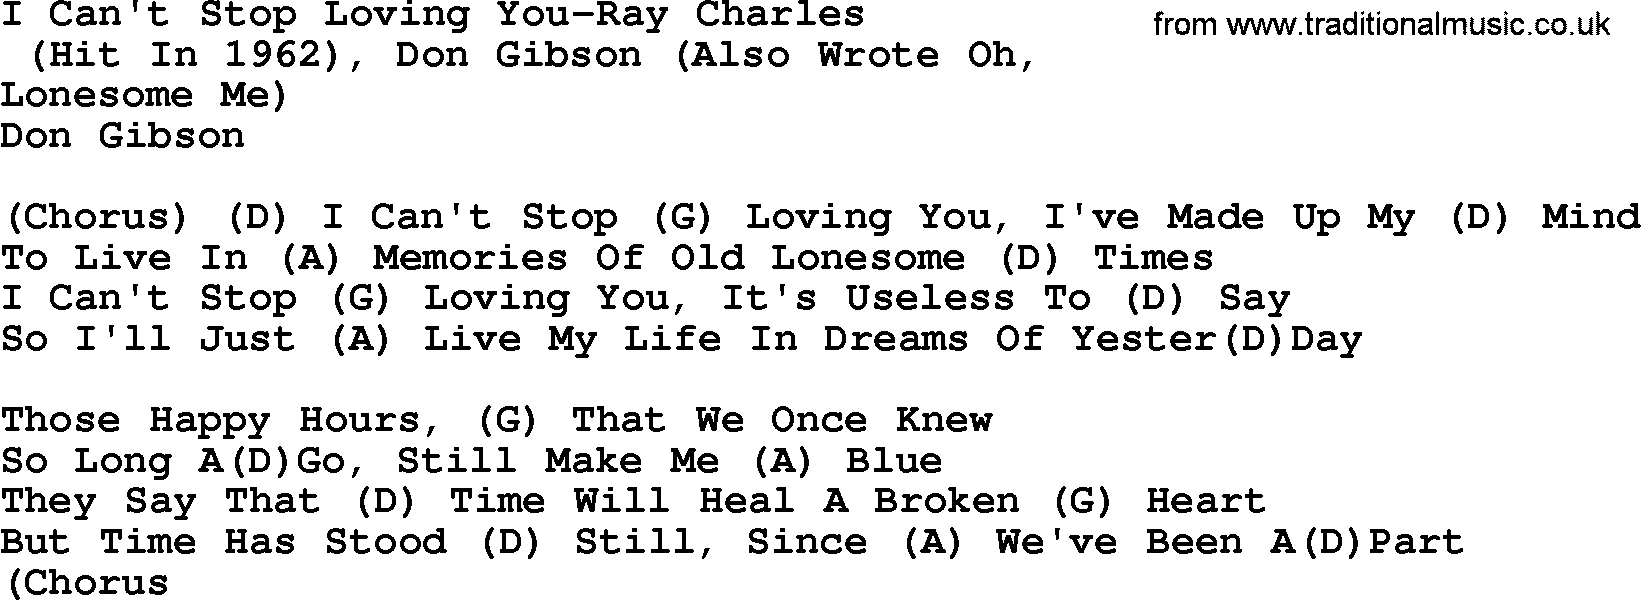 Country music song: I Can't Stop Loving You-Ray Charles lyrics and chords